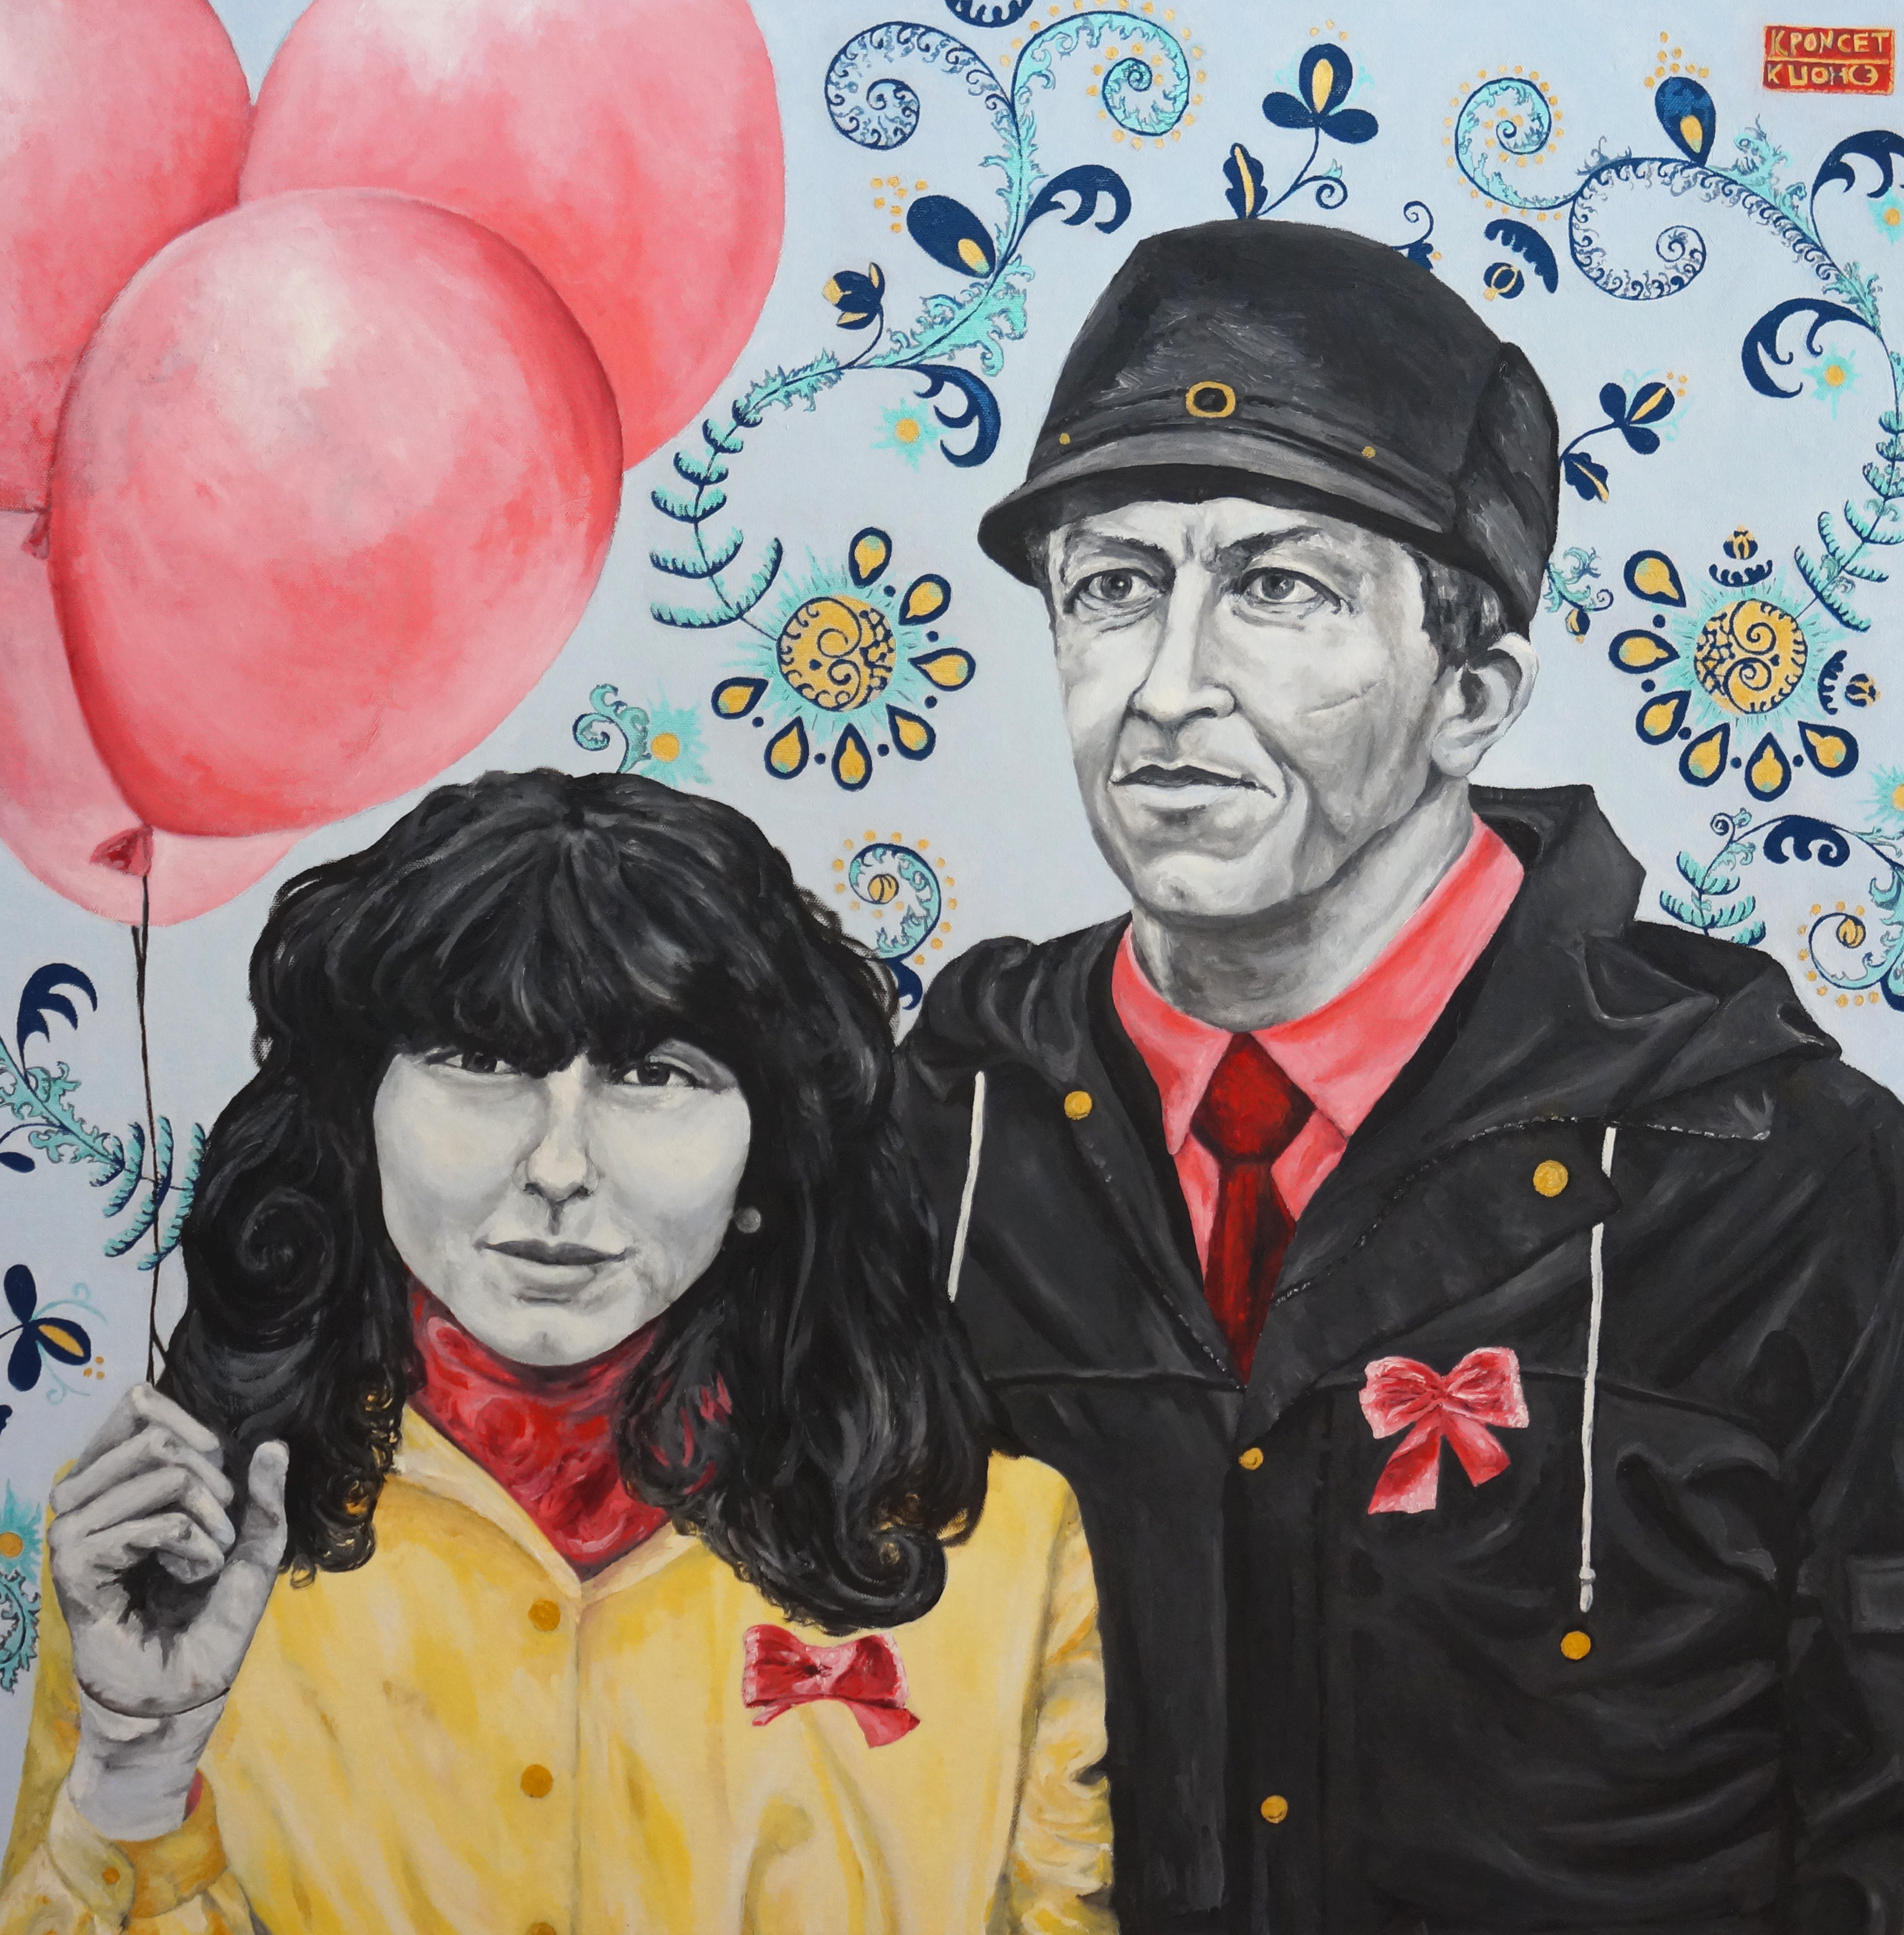 A gril holding a balloon with her father